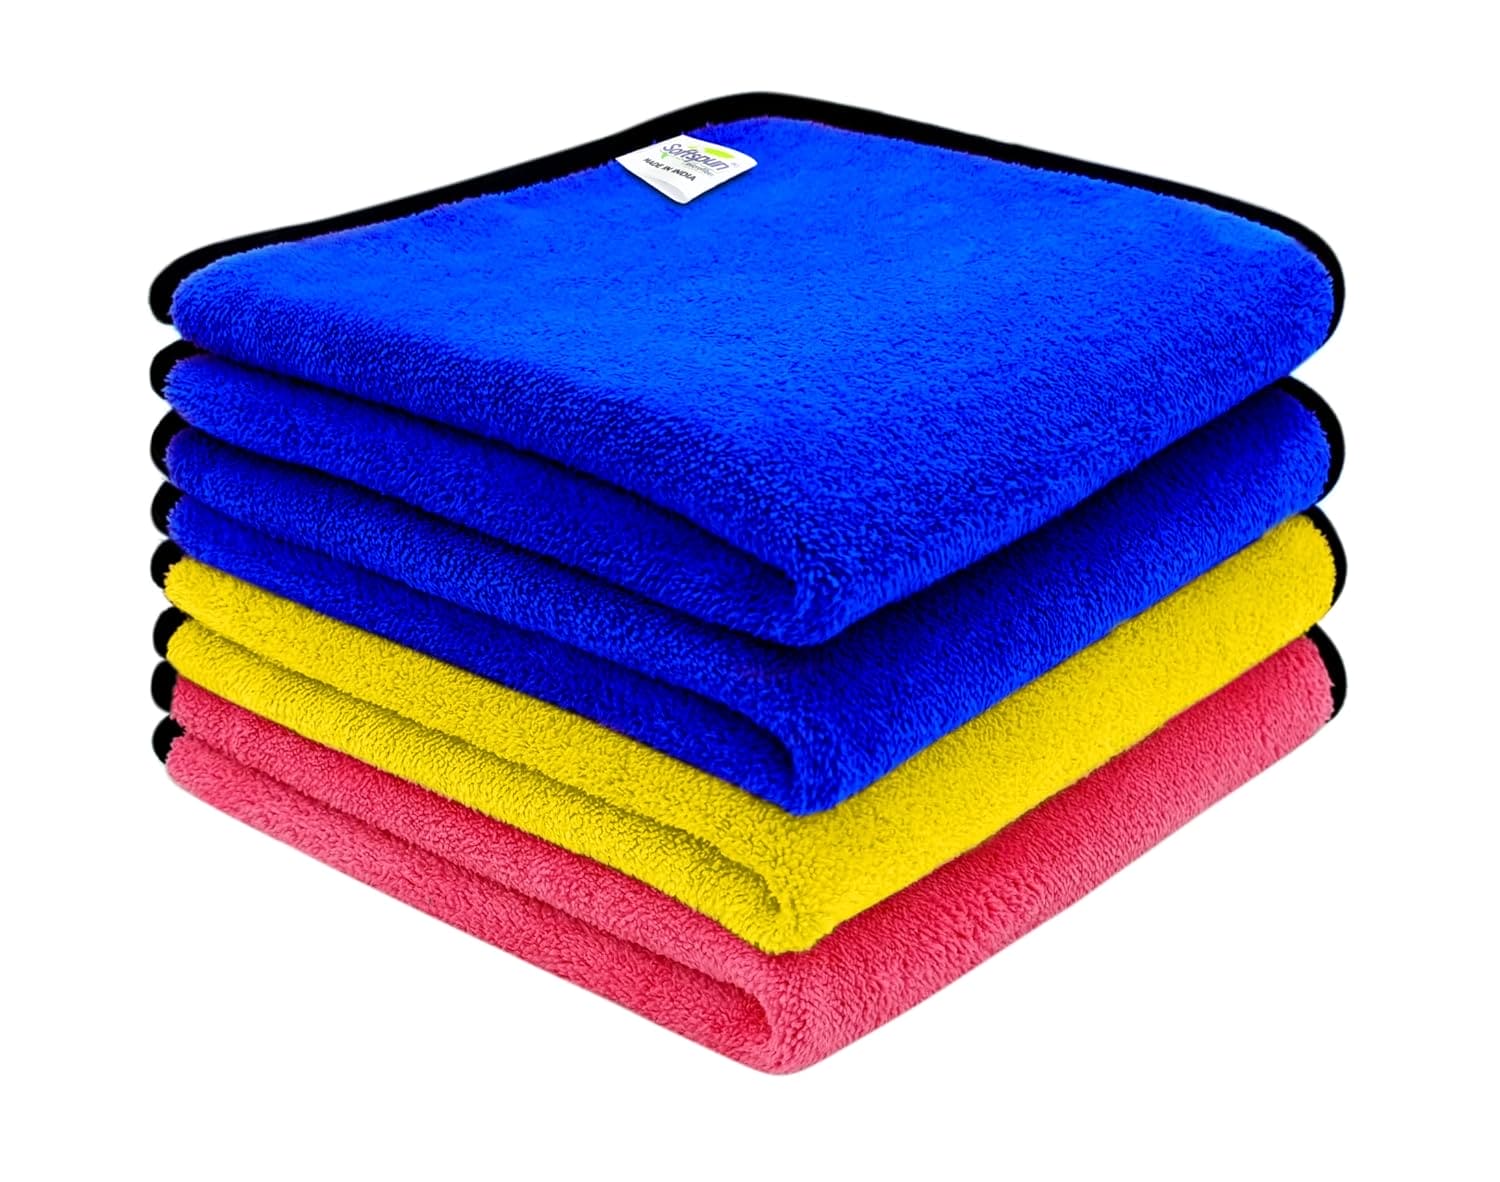 SOFTSPUN Microfiber Cloth for Car 600 GSM Extra Thick Microfiber Cleaning Cloths Perfect for Bike, Auto, Cars Both Interior and Exterior